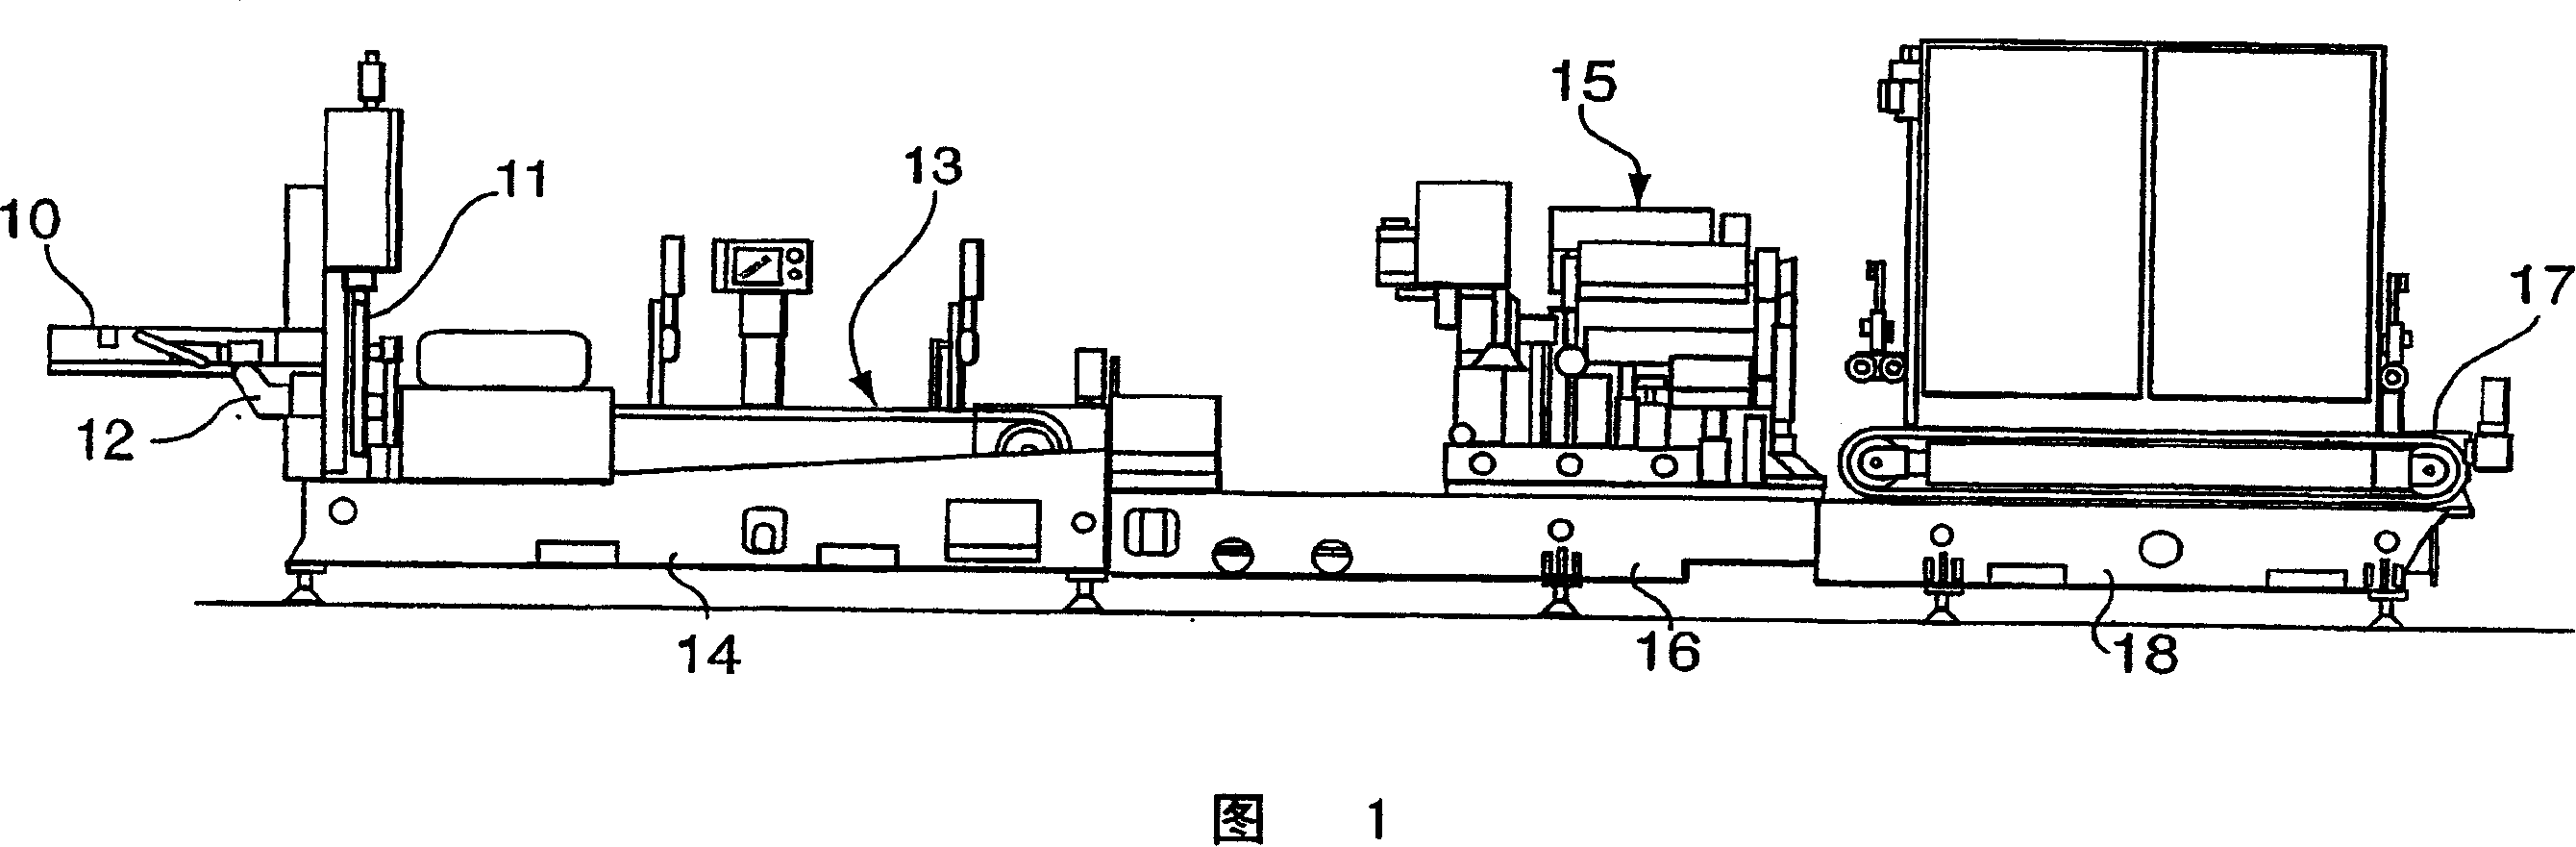 Apparatus and method for horizontal casting and cutting of metal billets